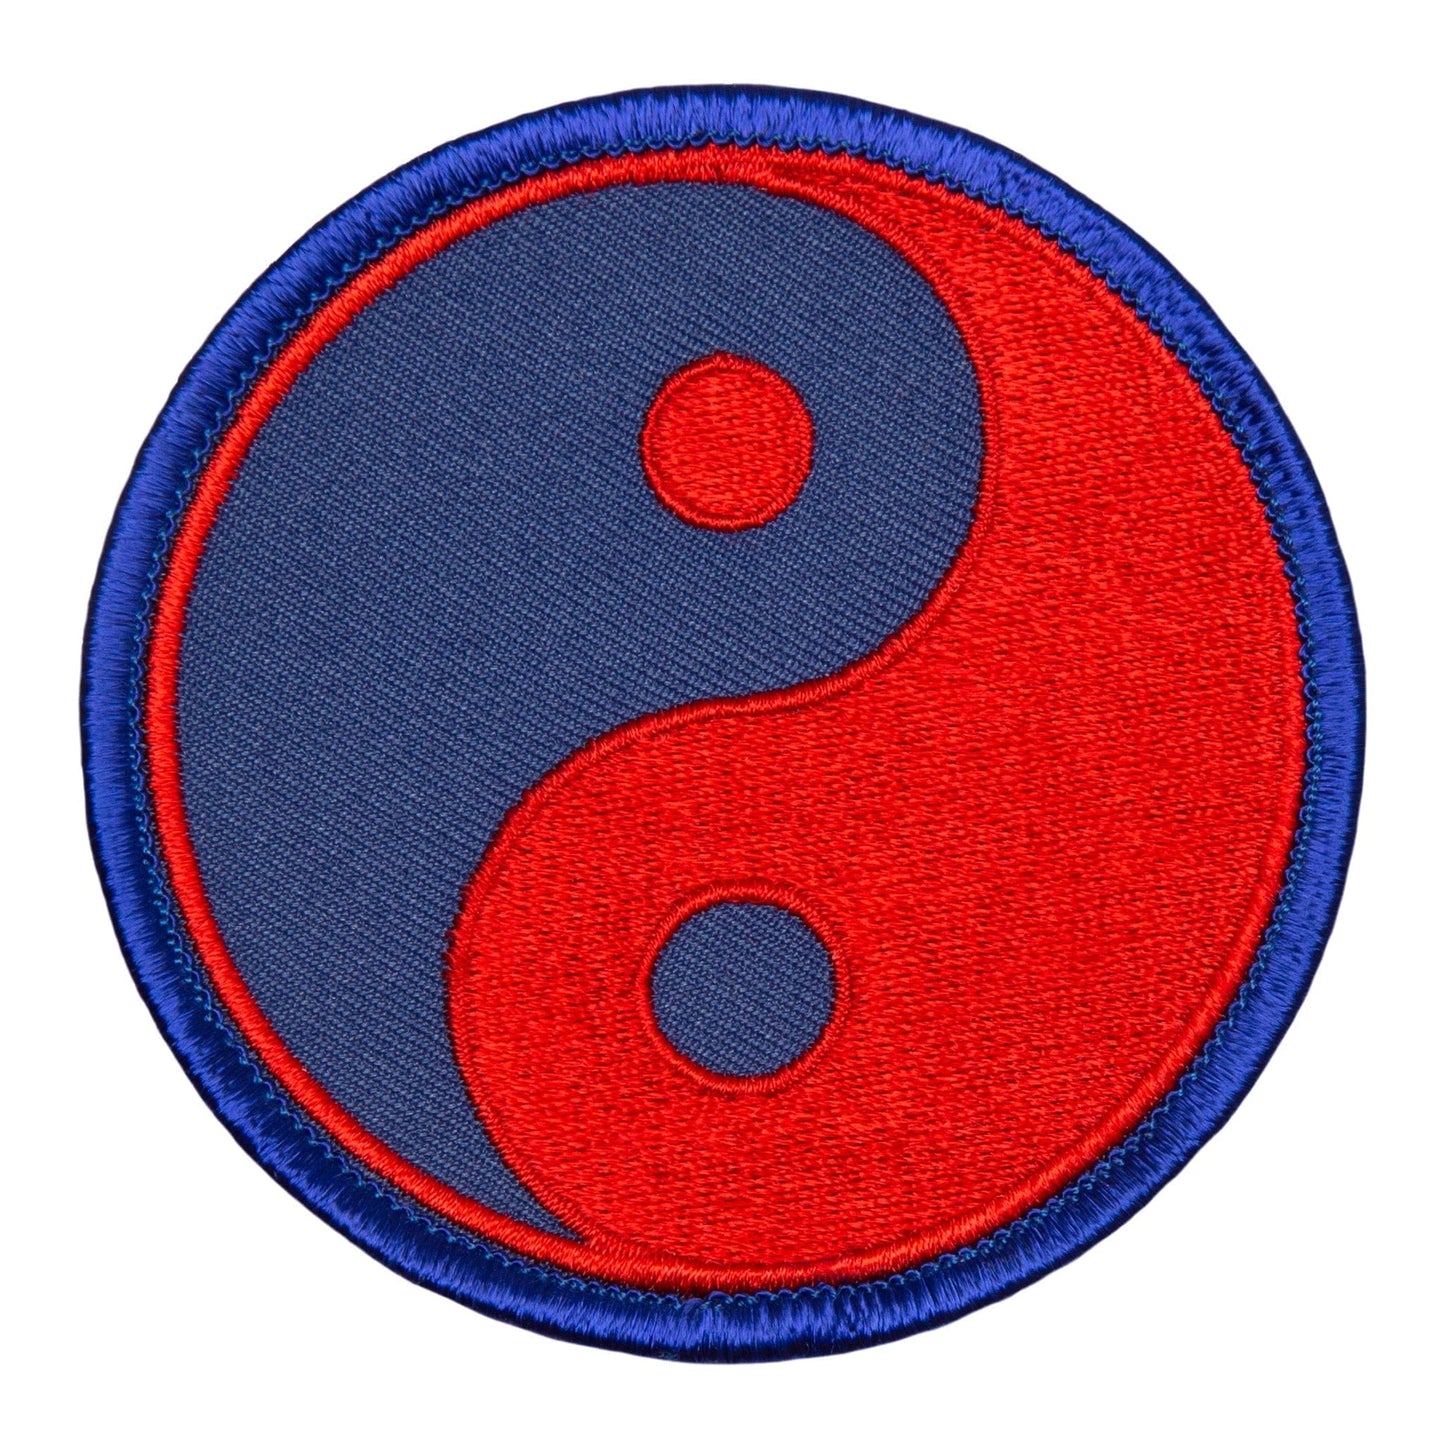 EclipseMartialArtsSupplies sporting goods Yin & Yang-Red and Blue Patch Martial Arts Uniform Patch